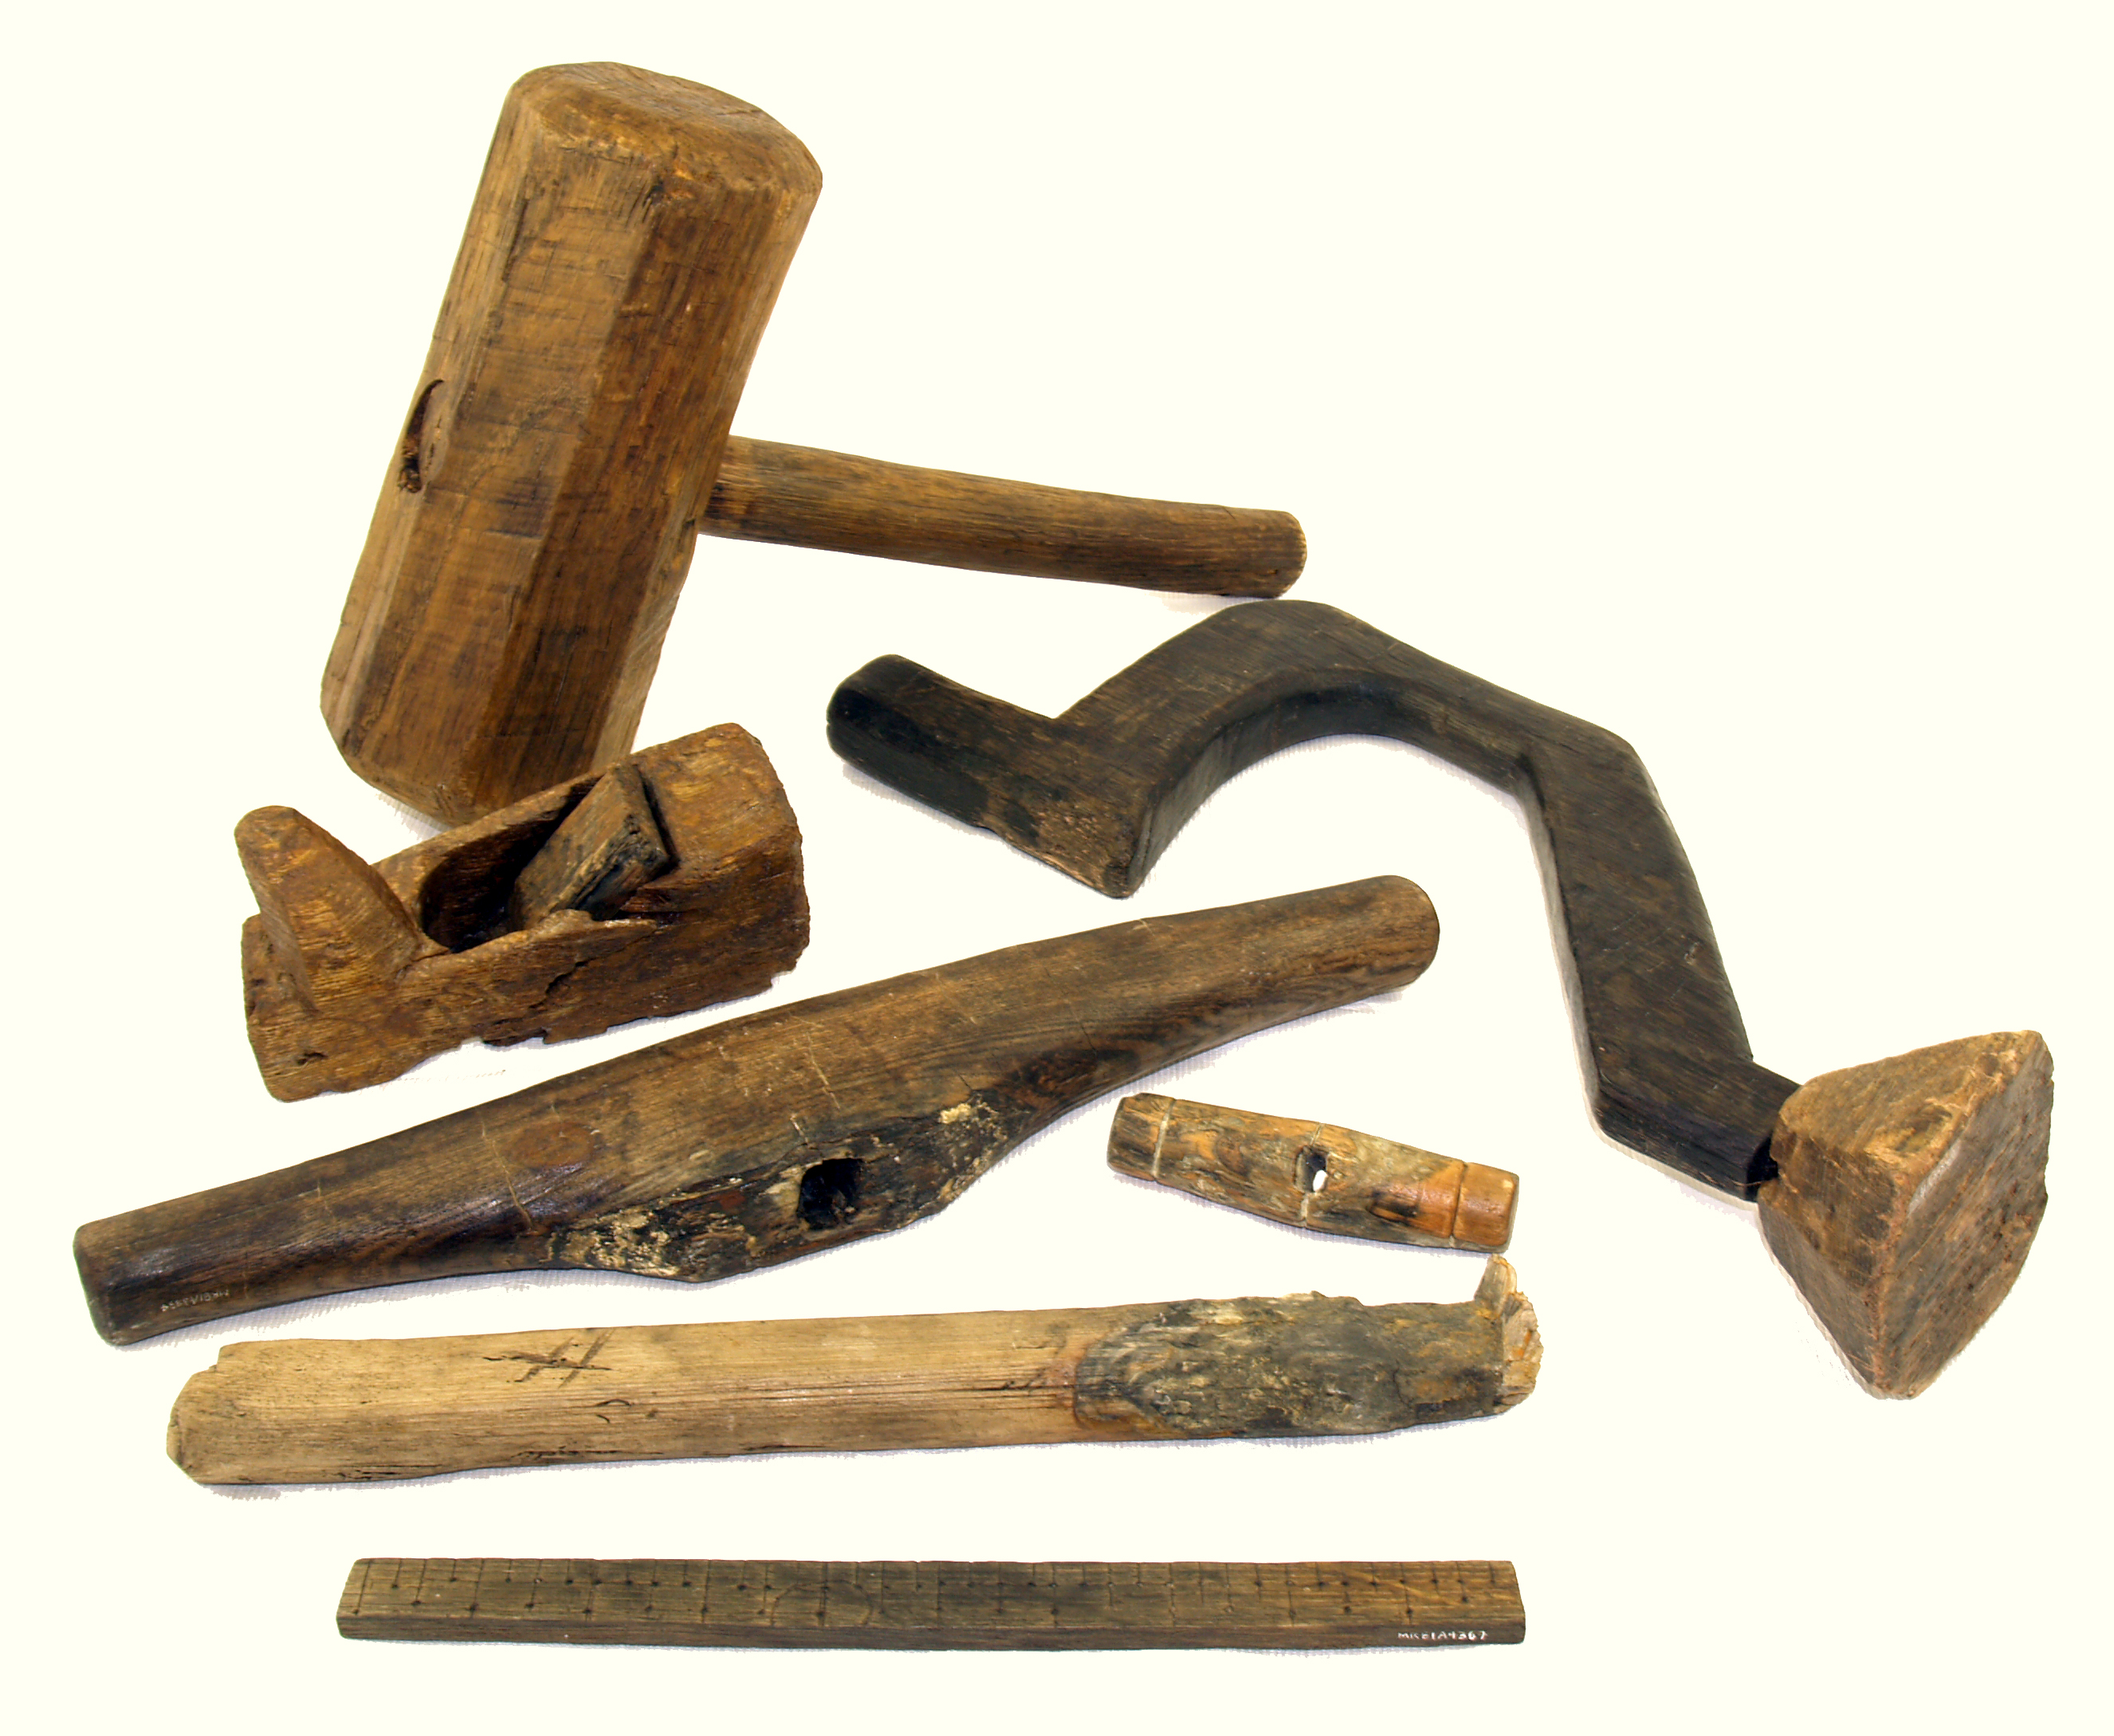 An old fashioned carpenter's tools